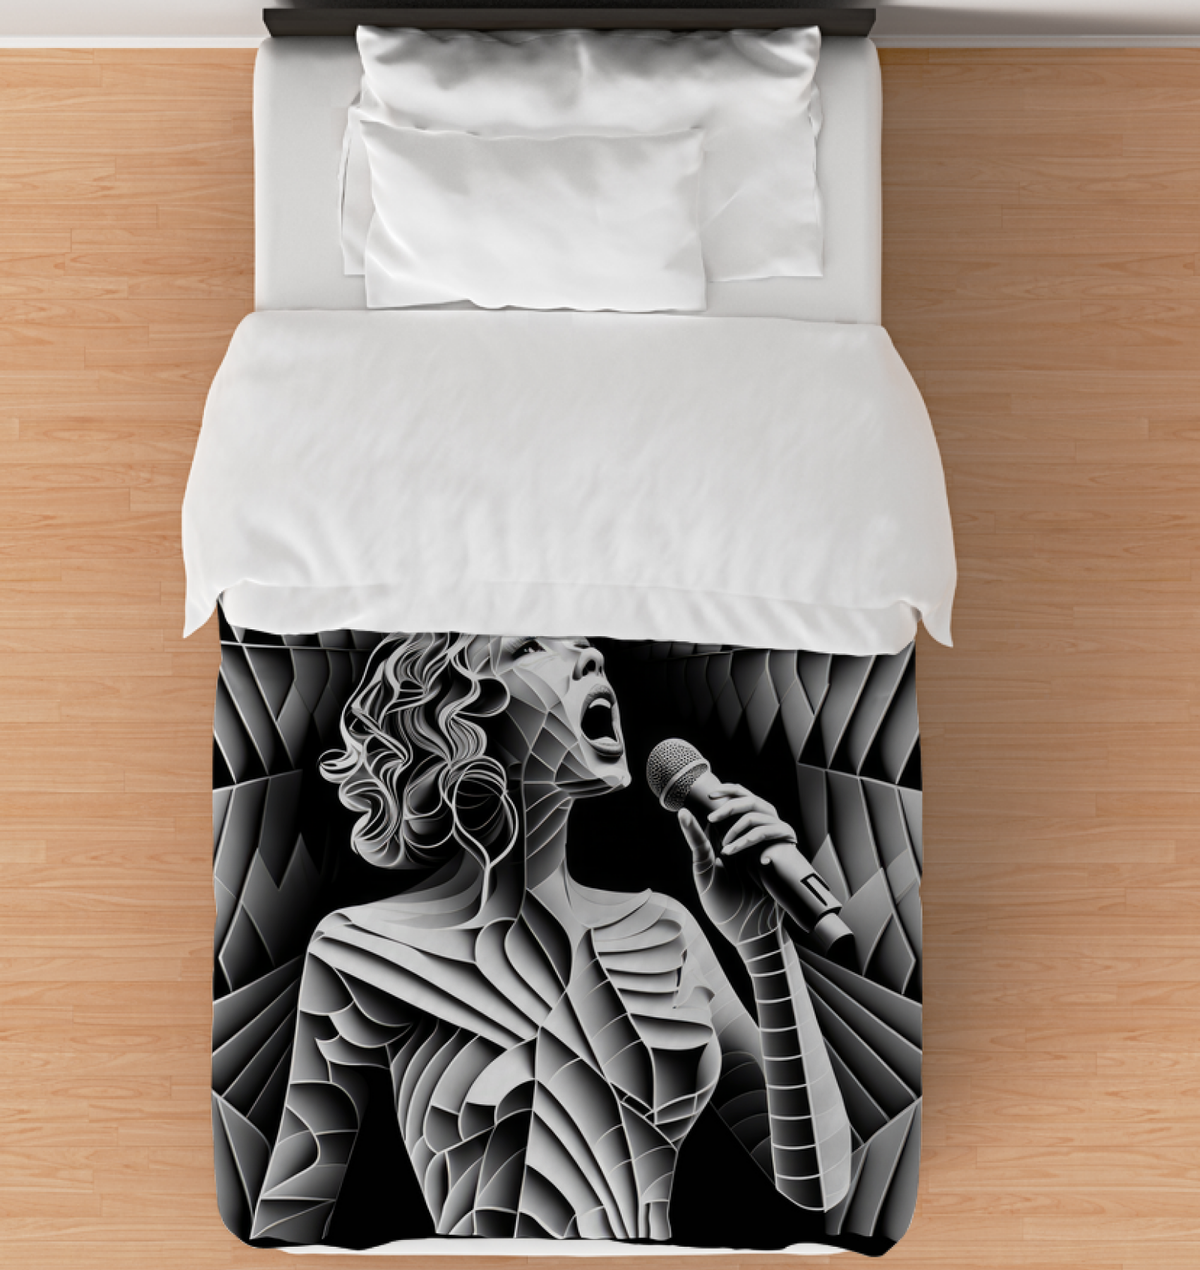 Jazzed-Up Comfort Duvet Cover